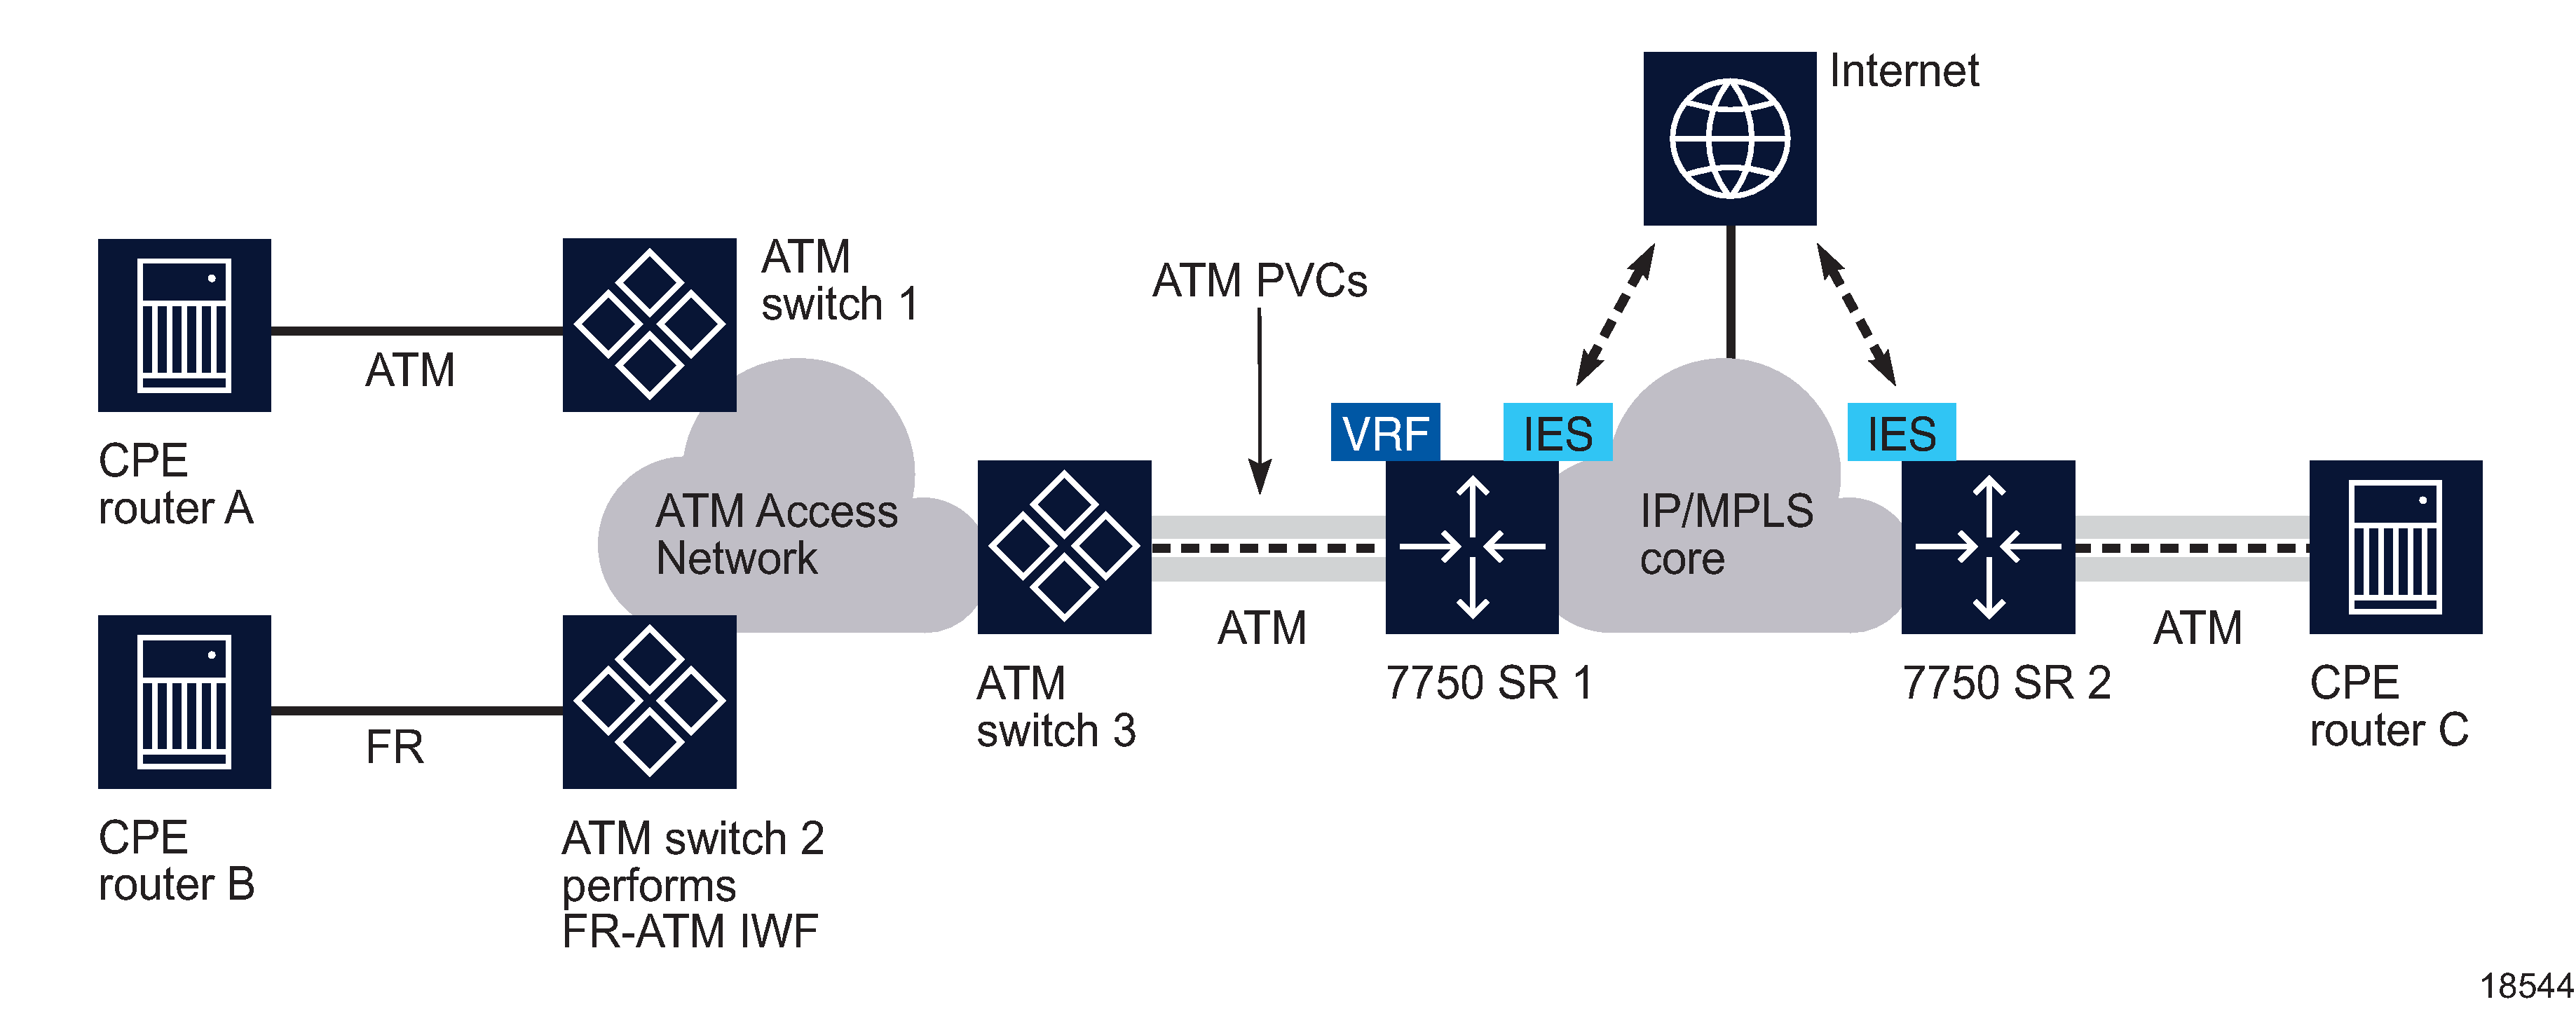 ATM SAP network connection to an IES